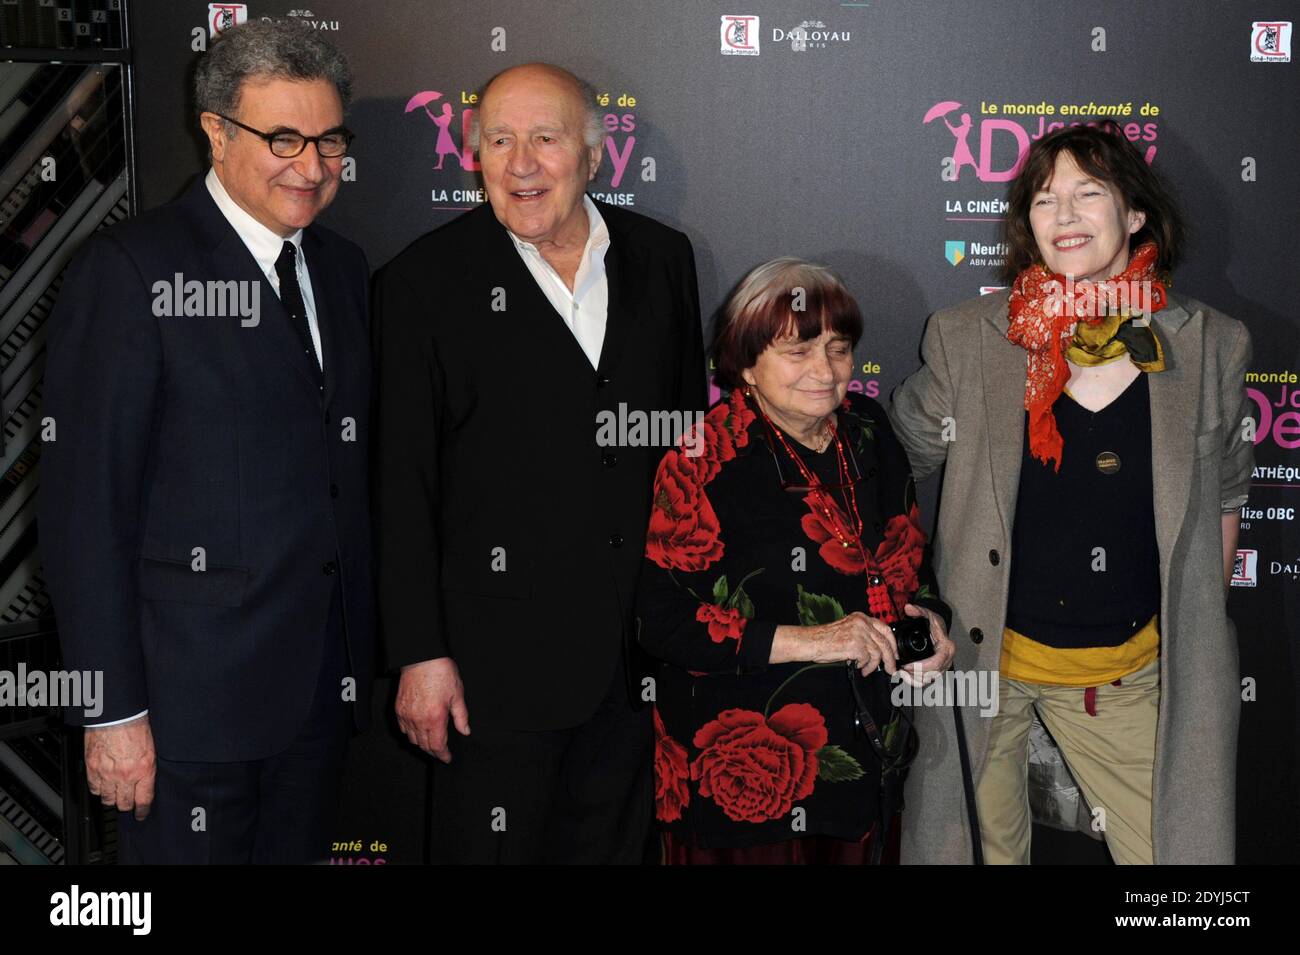 Serge Tubiana, Michel Piccoli, Agnes Varda and Jane Birkin attending the 'Le Monde Enchante de Jacques Demy' exhibition opening at the french Cinematheque in Paris, France on April 08, 2013. Photo by Aurore Marechal/ABACAPRESS.COM Stock Photo